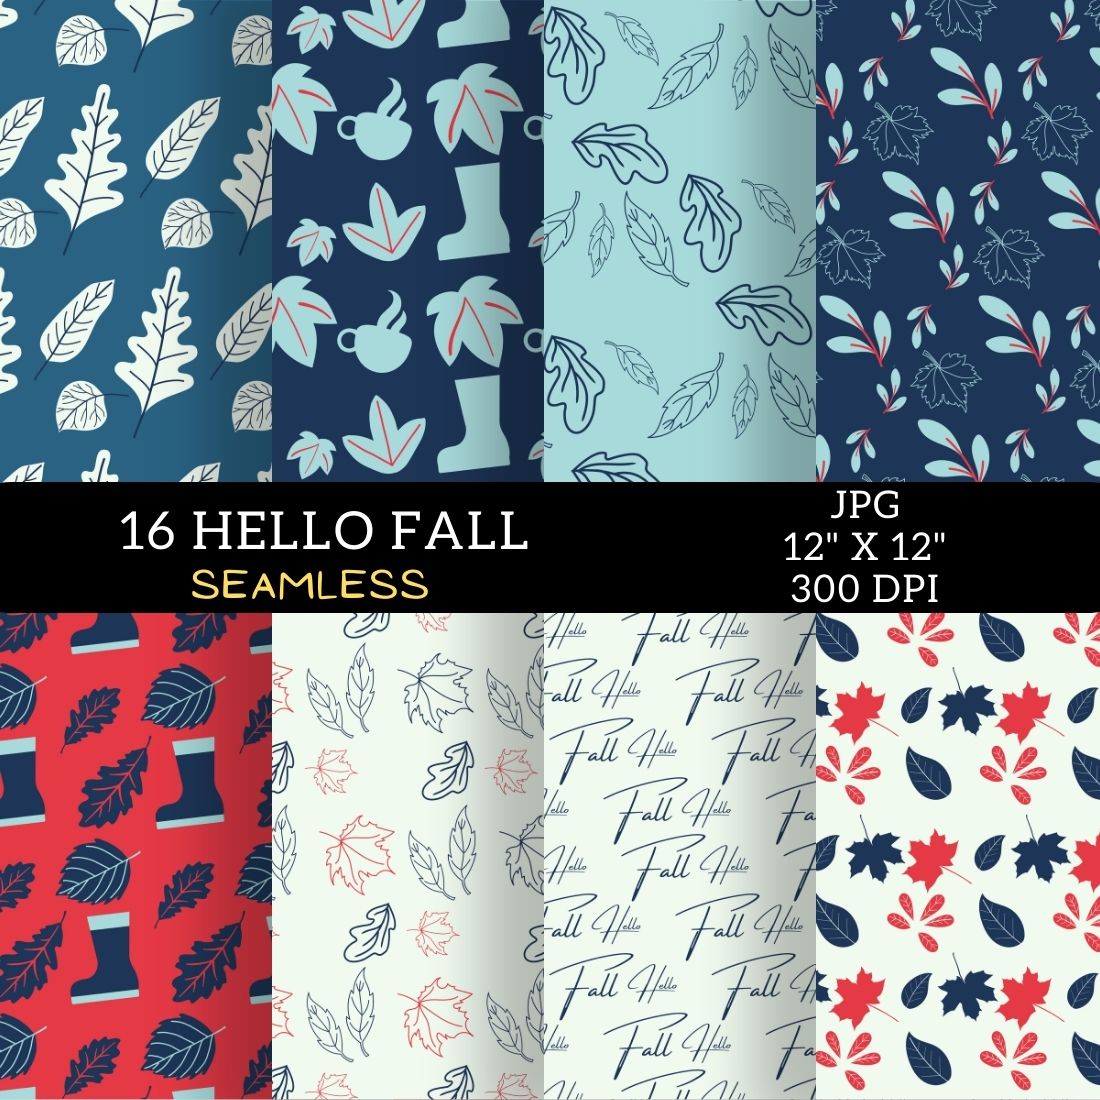 A selection of adorable autumn-themed background patterns.